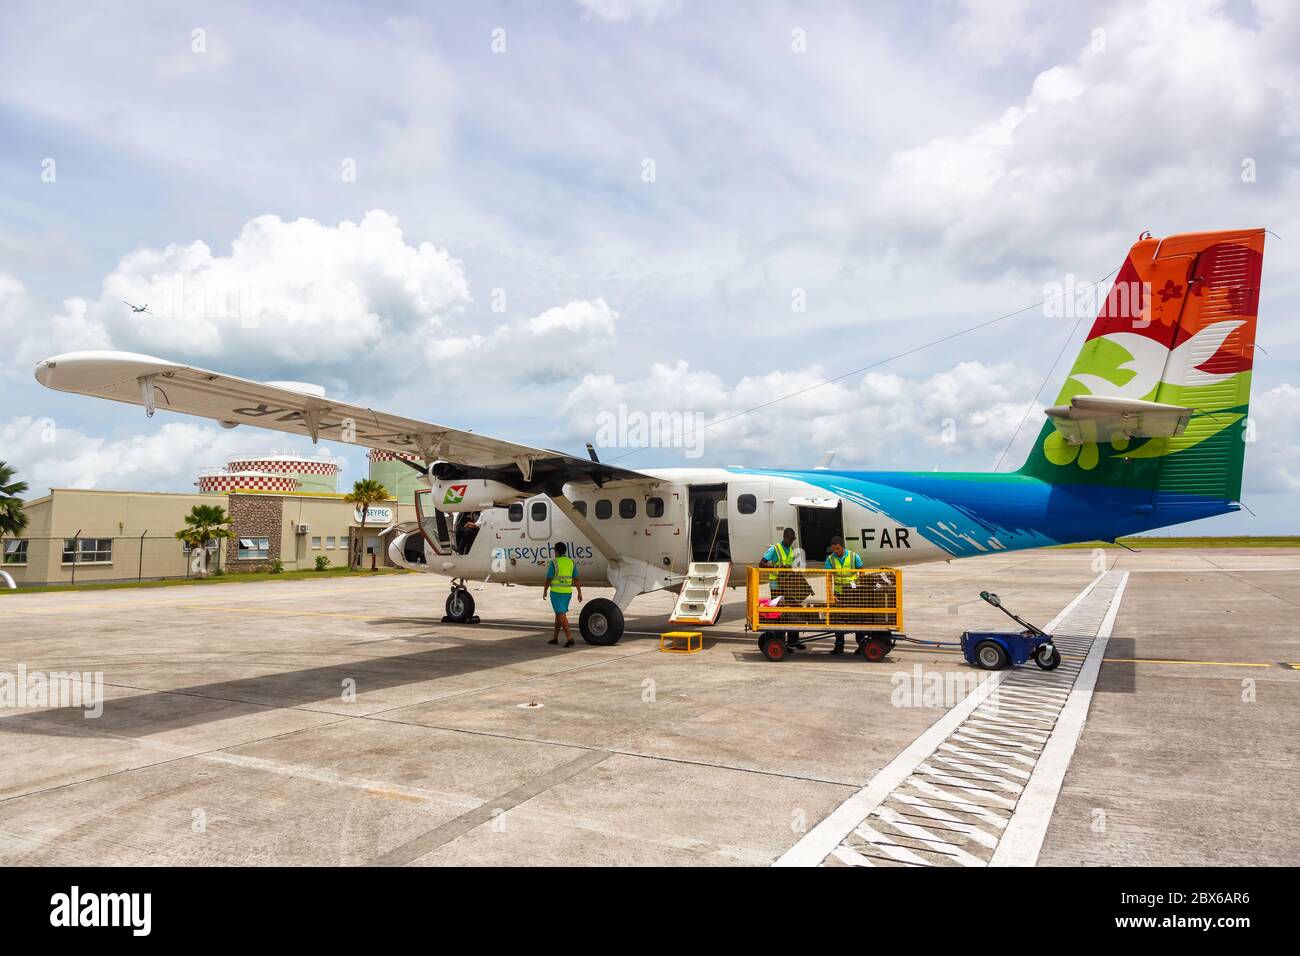 Mahe, Seychelles - February 7, 2020: Air Seychelles DHC-6-400 Twin Otter airplane at Mahe airport (SEZ) on the Seychelles. Stock Photo